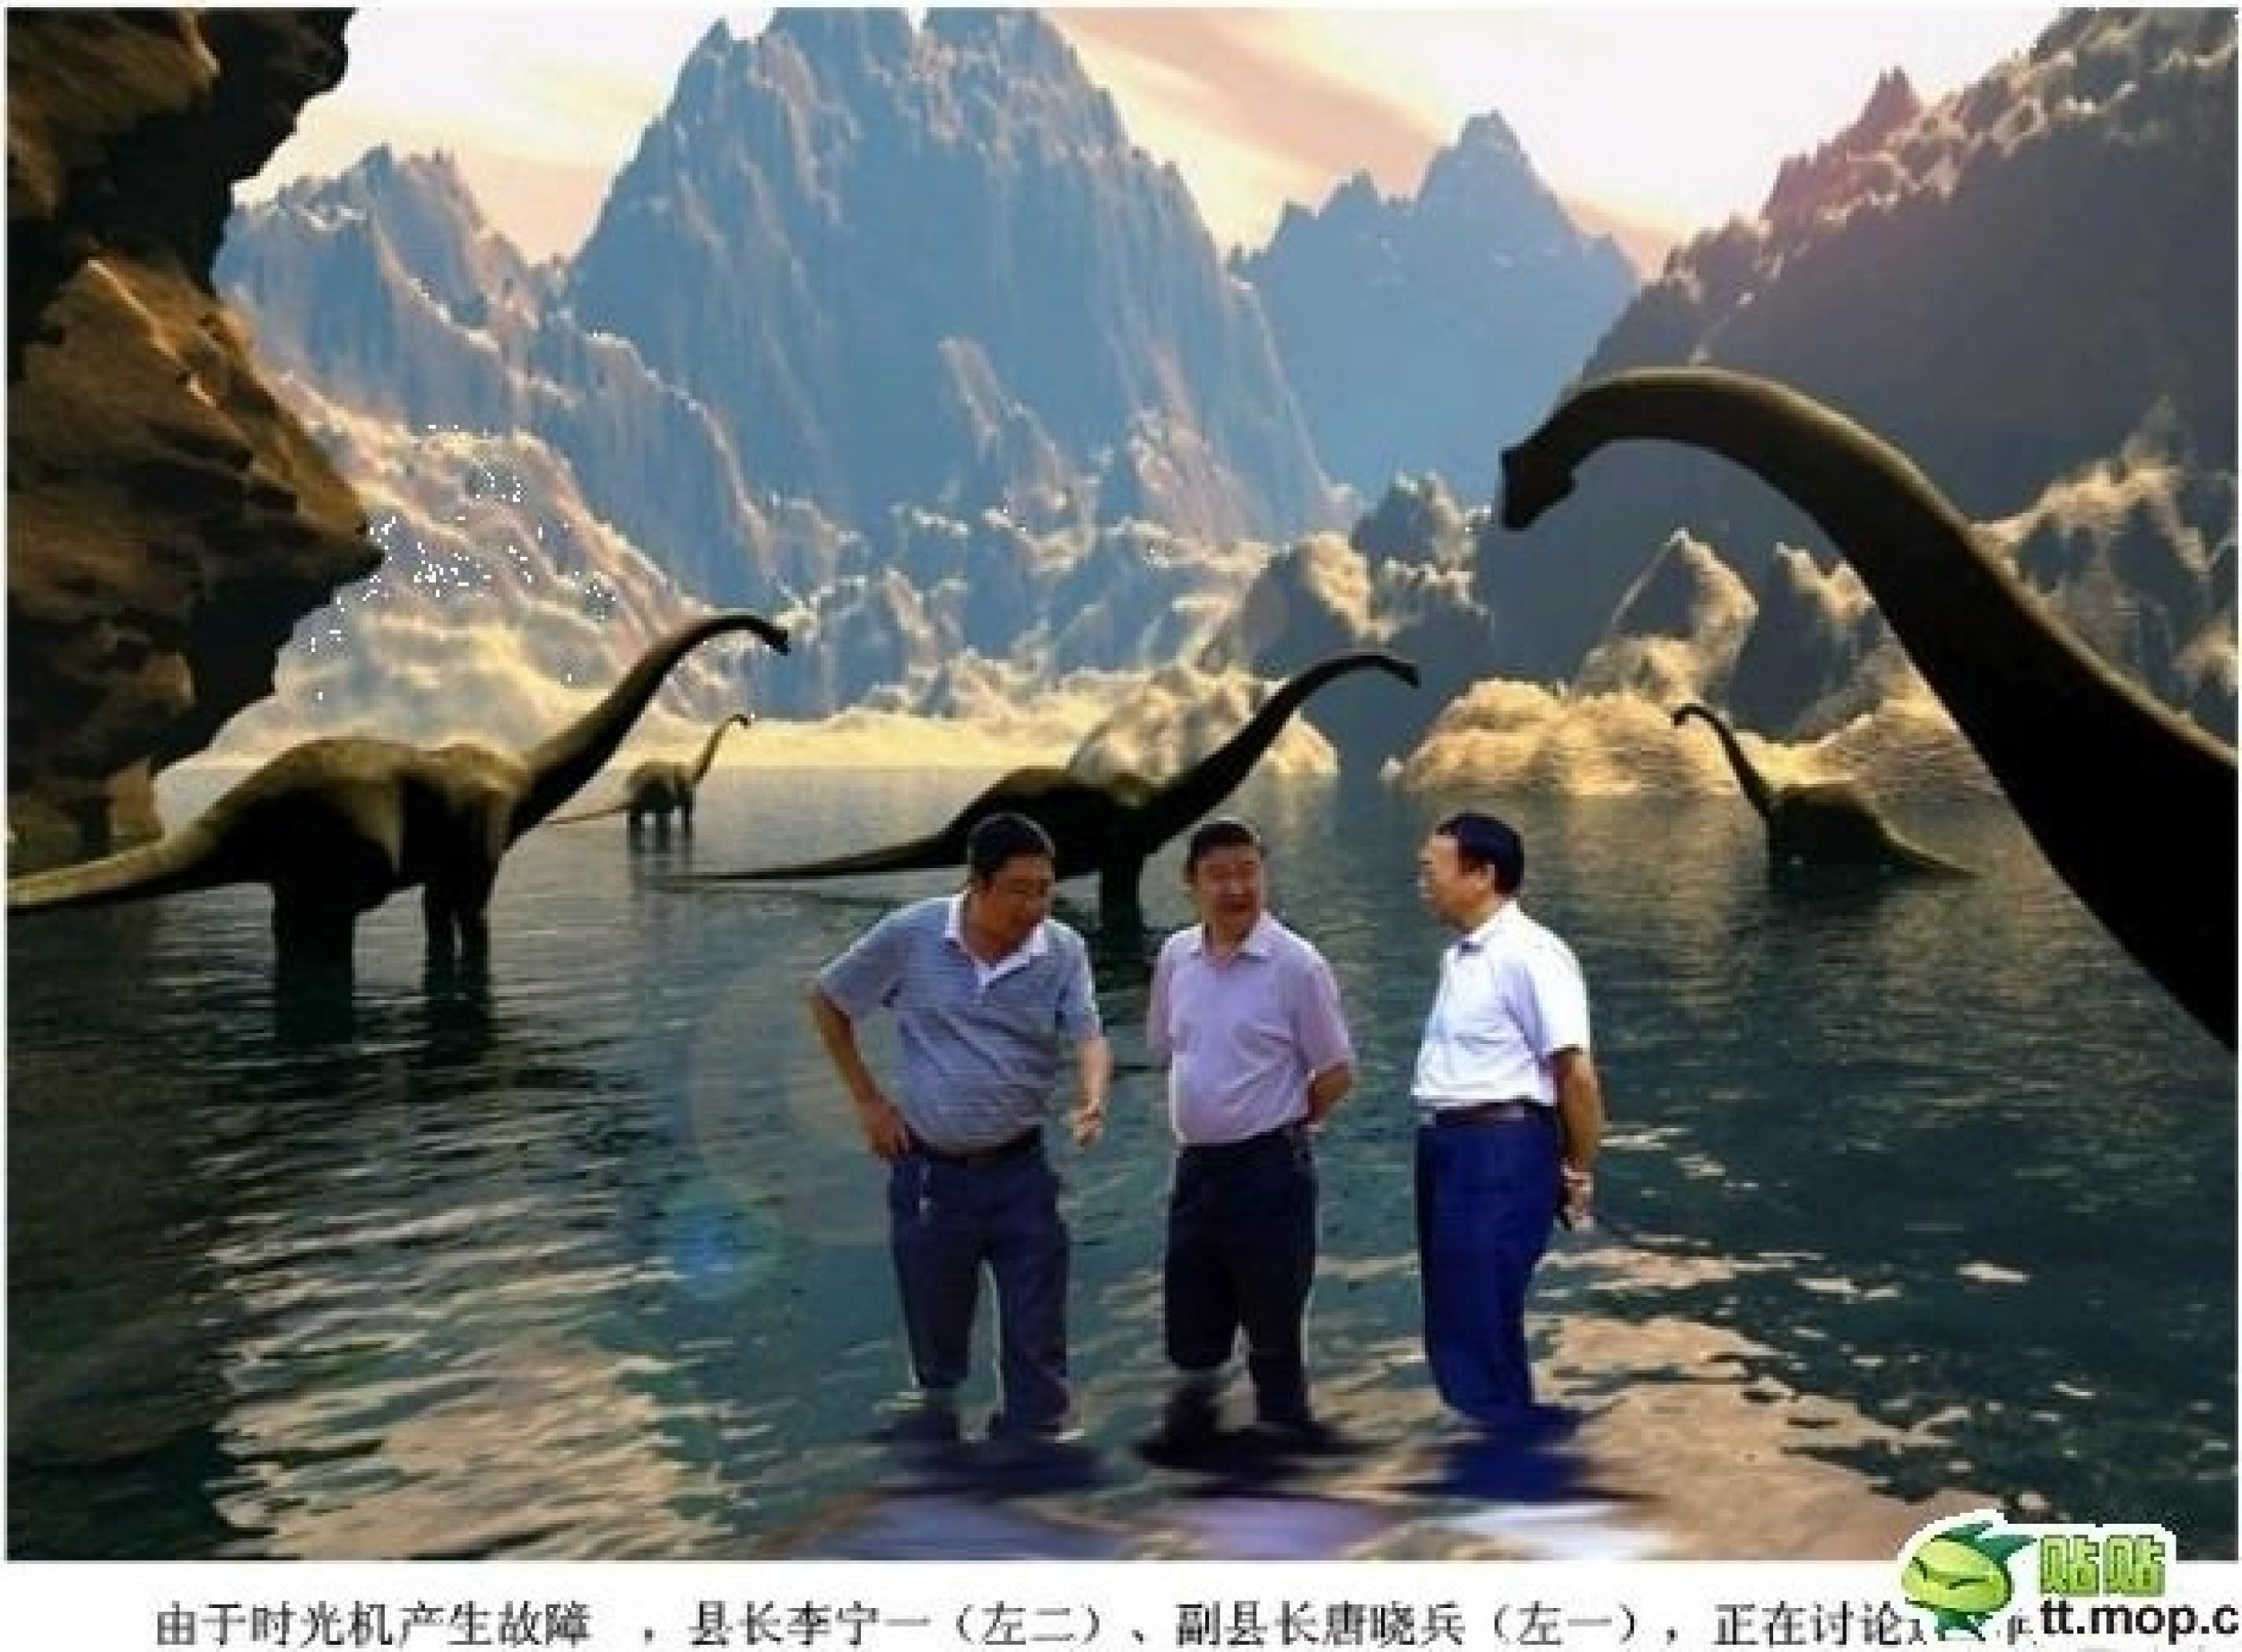 The 3 Chinese government officials are not afraid of dinosaurs.